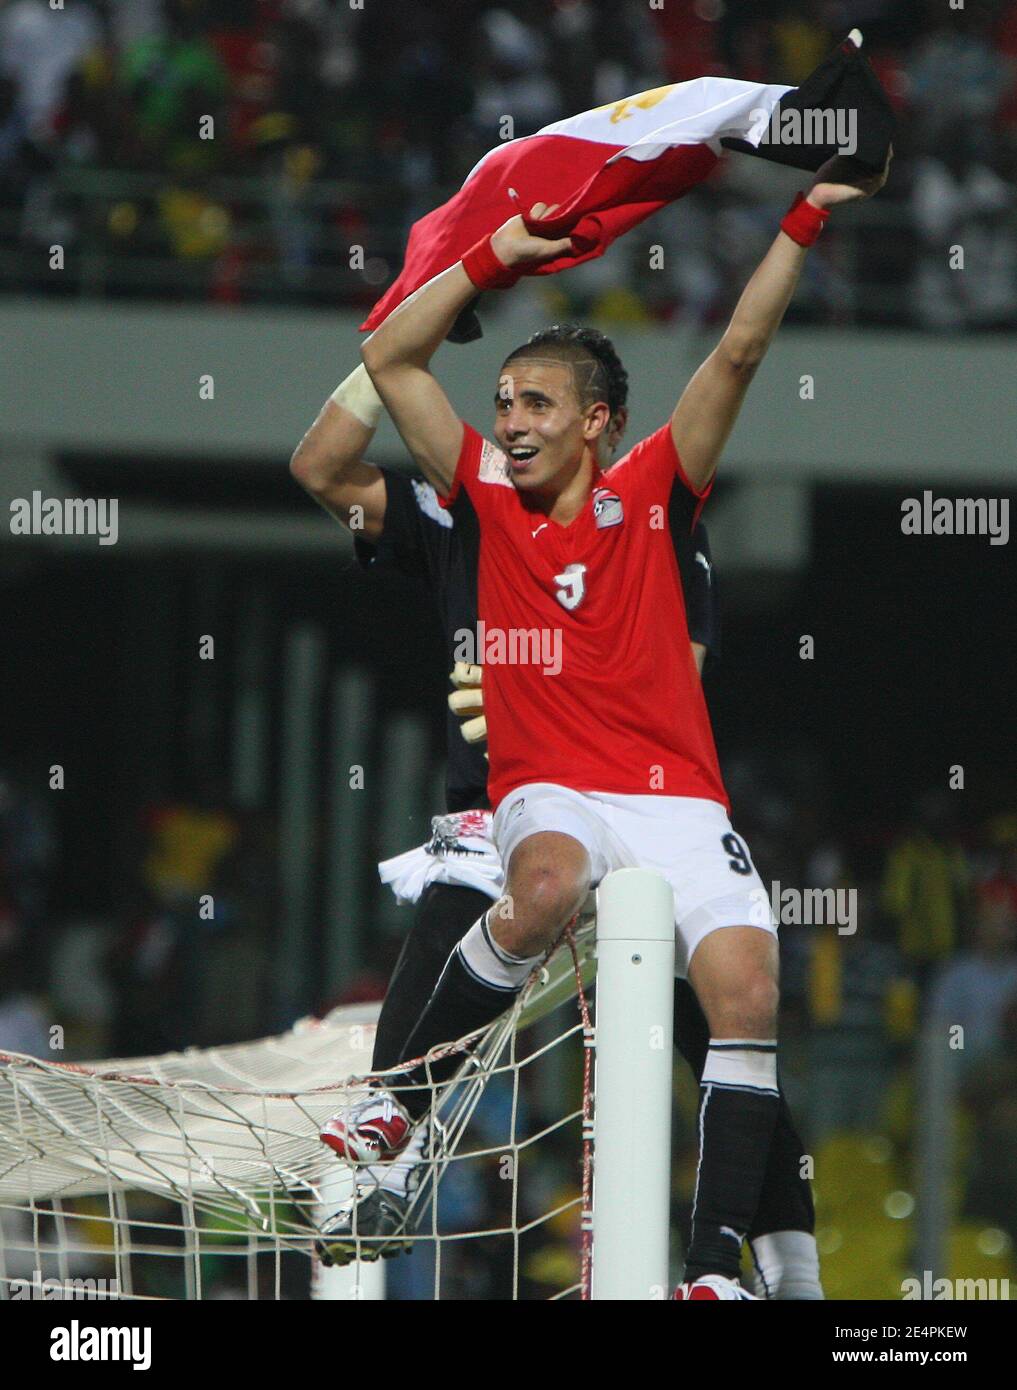 Egypt's Goalkeeper Esam Kamal Tawfik El Hadary and Mohamed Abdalla Mohamed Zidan celebrate during the Final of the 2008 African Cup of Nations soccer tournament, Cameroon vs Egypt in Accra, Ghana on February 10, 2008. Egypt won the match 1-0. Photo by Steeve McMay/Cameleon/ABACAPRESS.COM Stock Photo